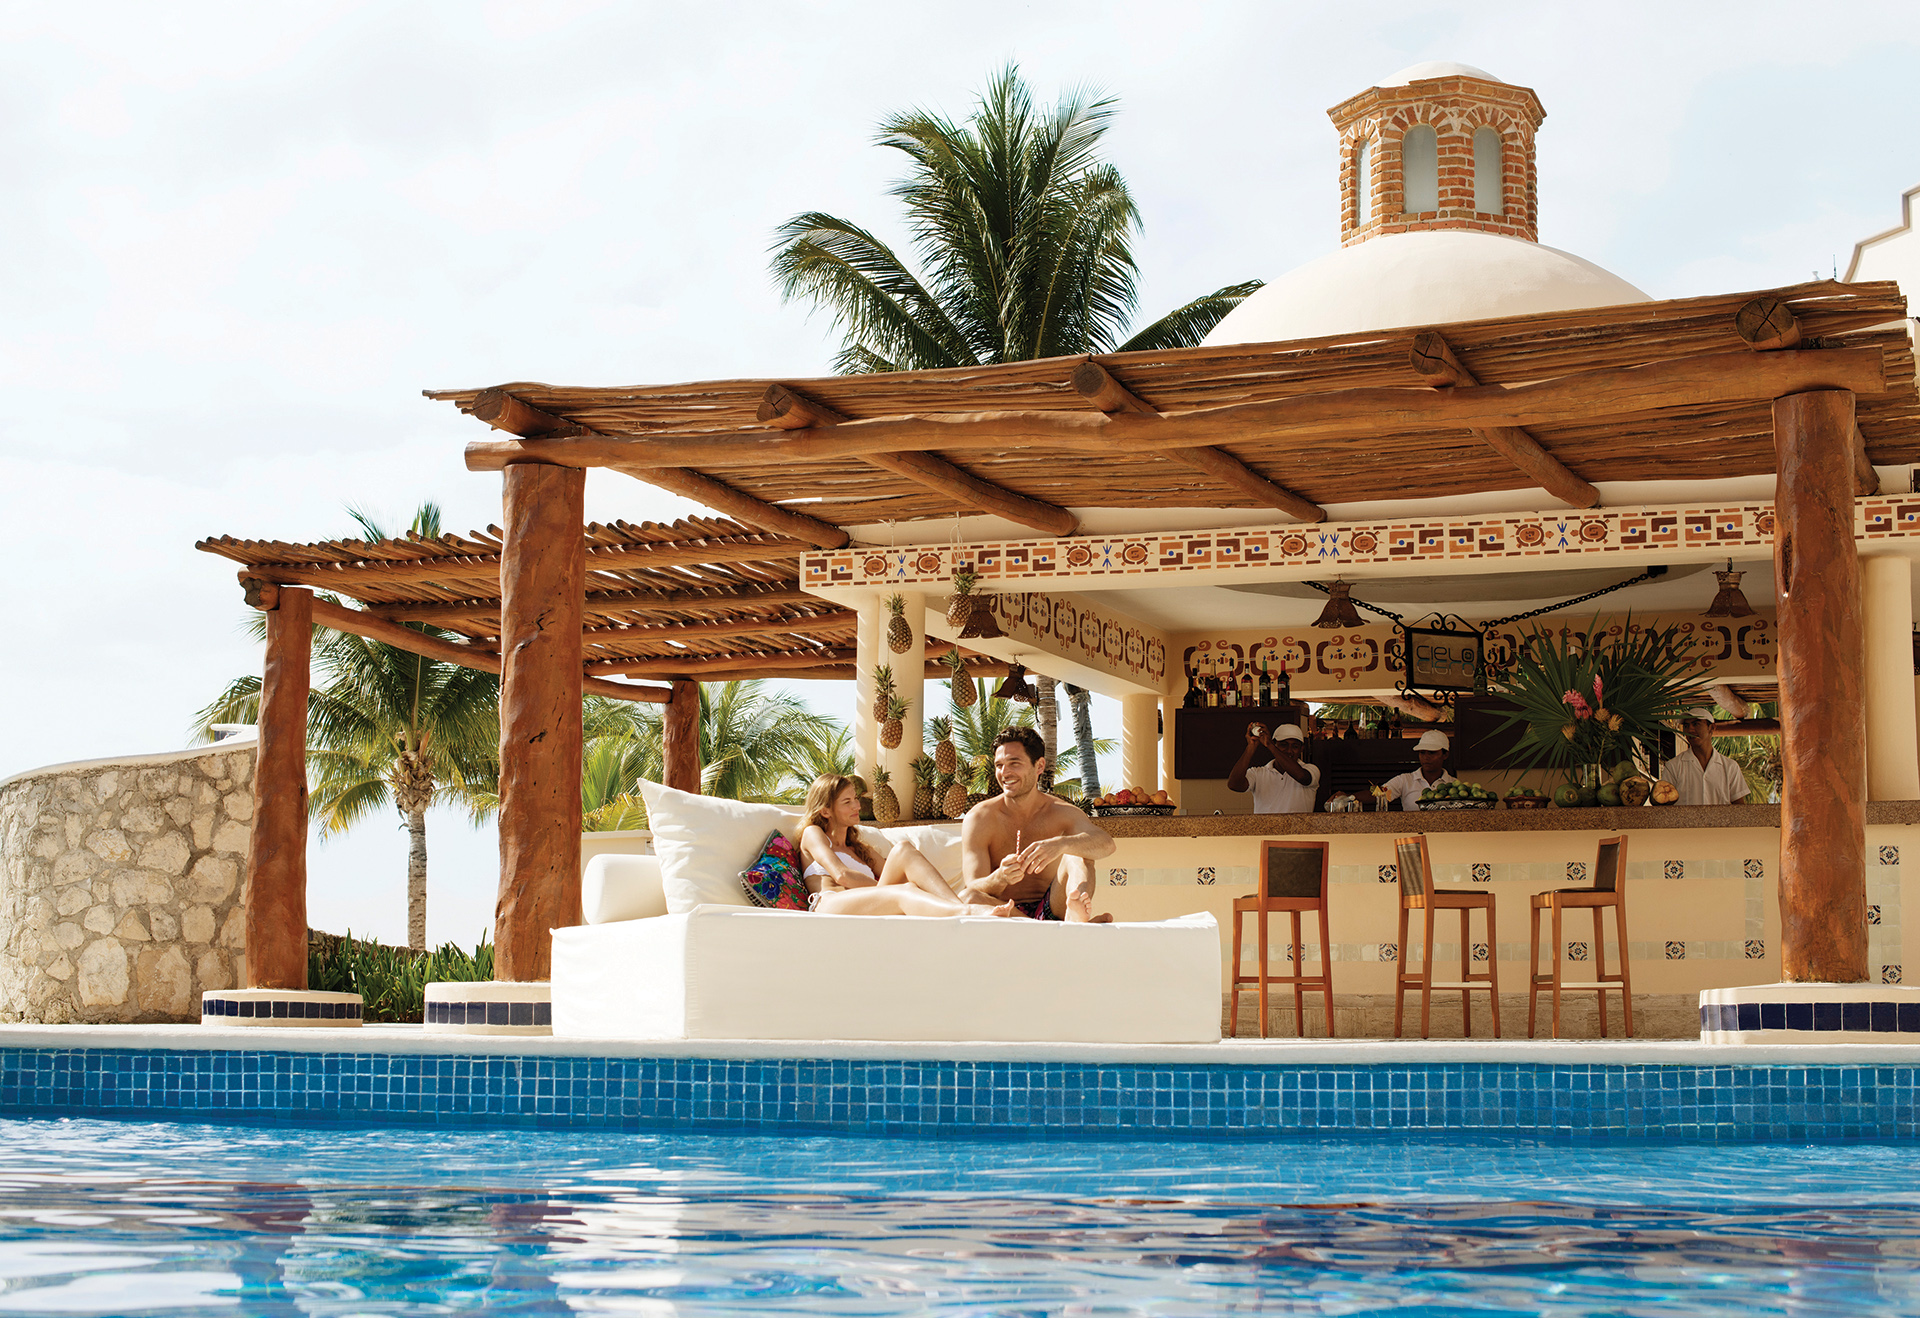 An exclusive and unique resort ambiance in Riviera Maya